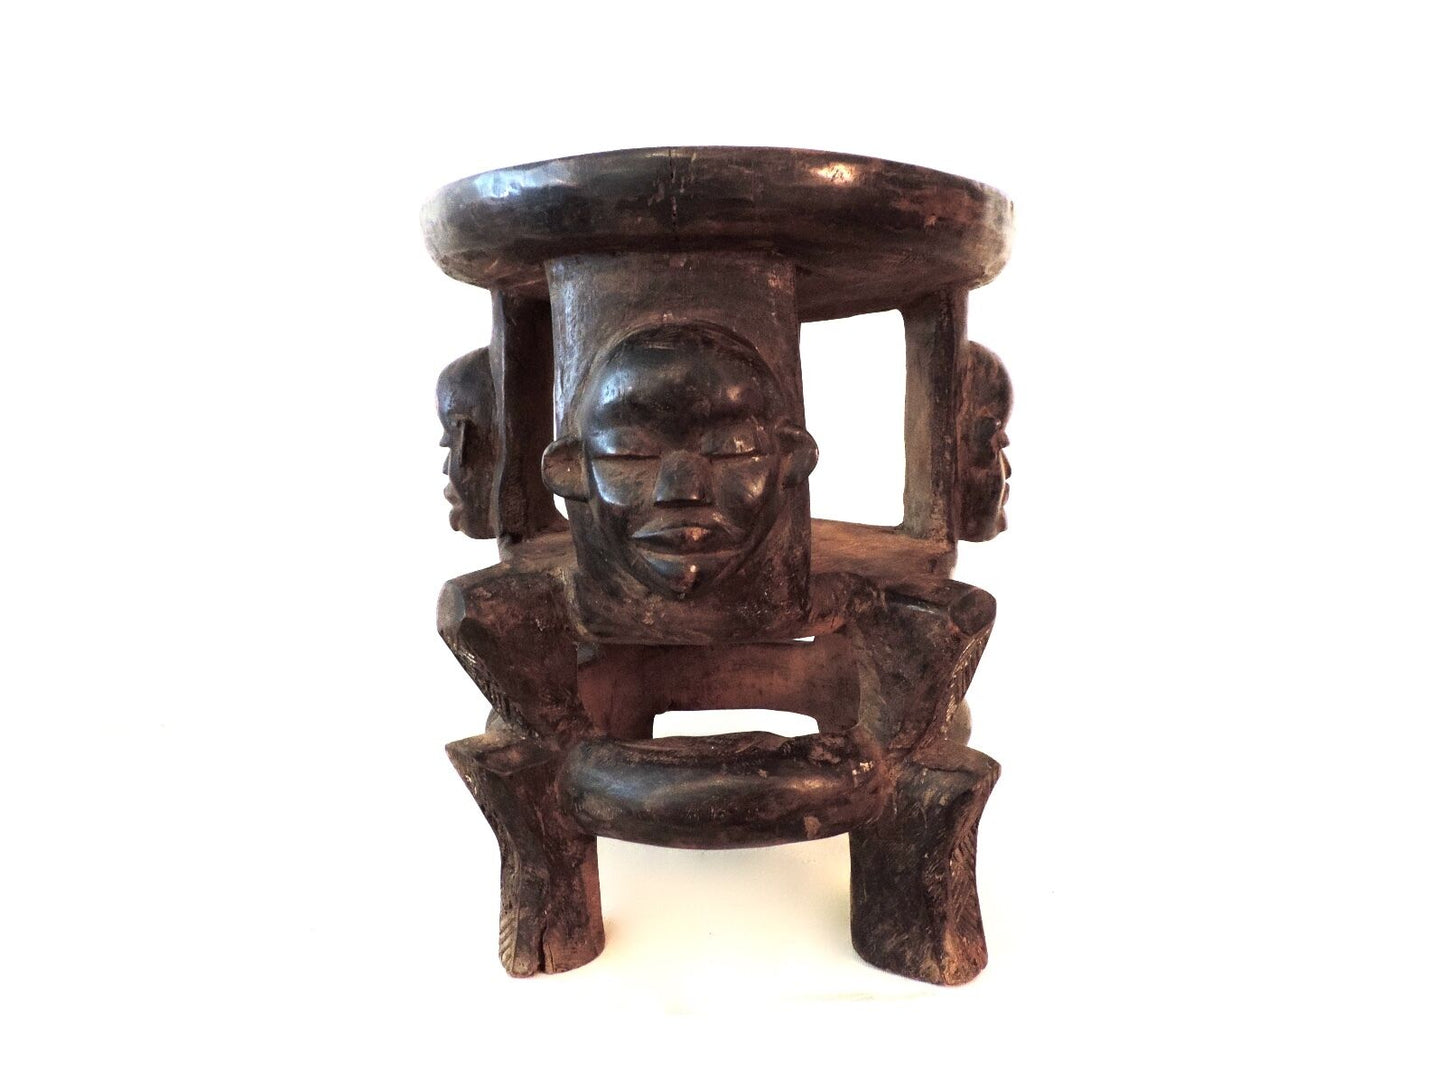 #1653 Carved Wooden Makonde Three-Legged Figurine Stool from Tanzania 17.5" H by 14.75